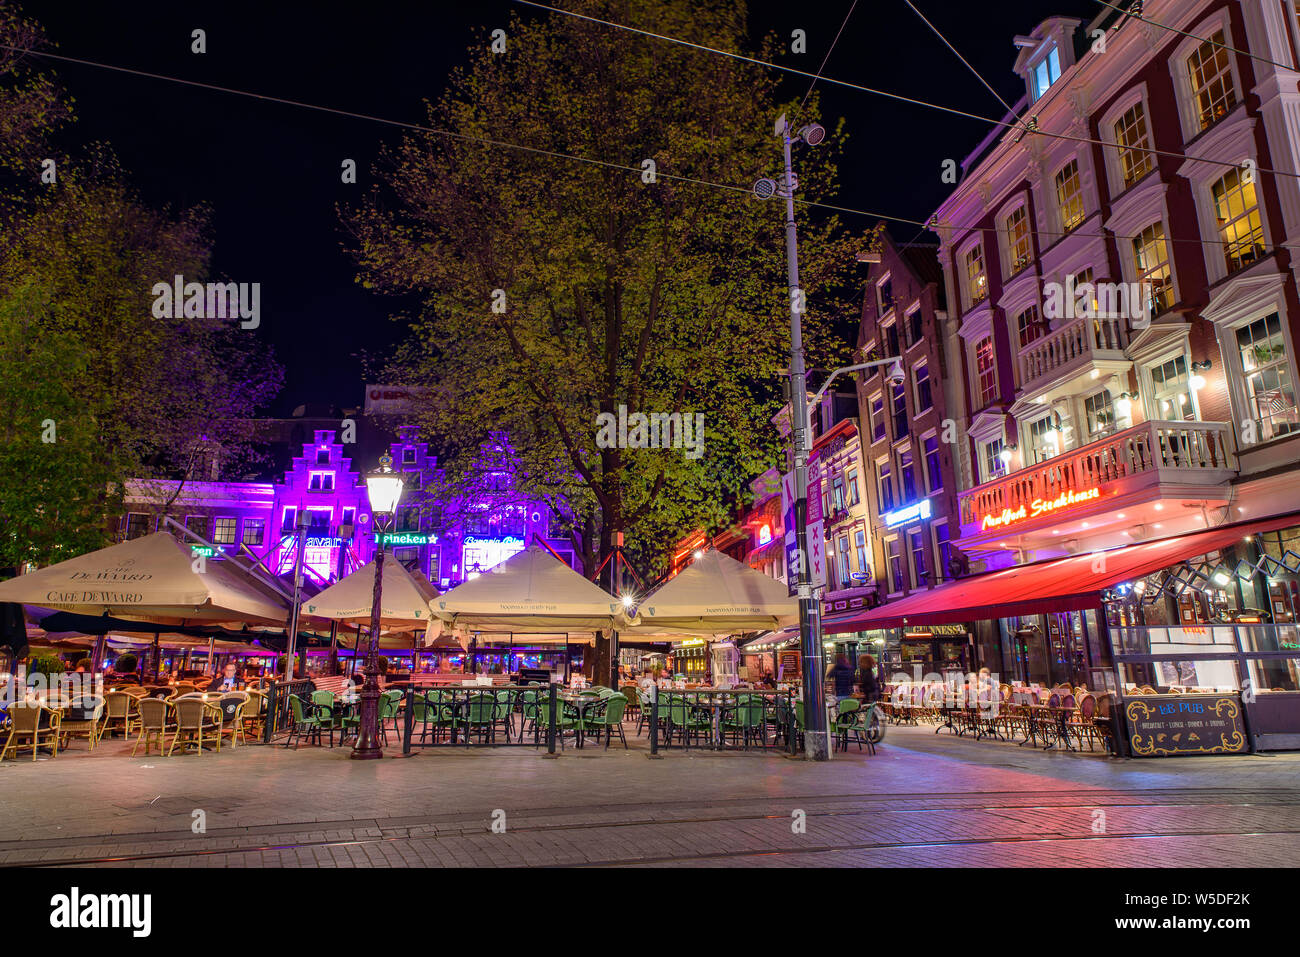 Night view of the Rembrandtplein square in Amsterdam, Netherlands Stock Photo